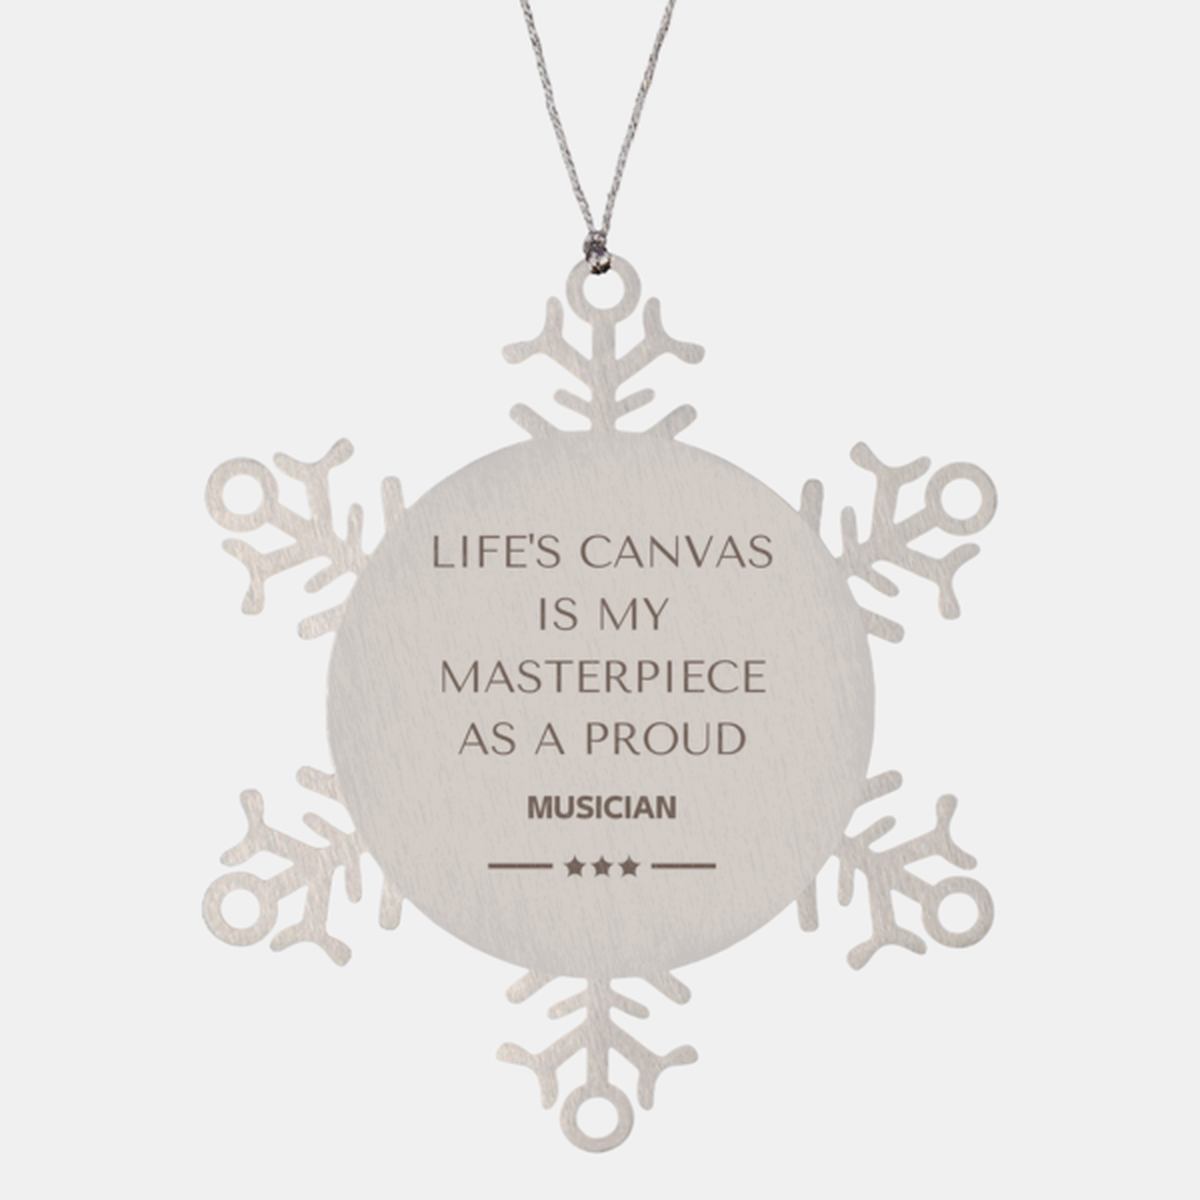 Proud Musician Gifts, Life's canvas is my masterpiece, Epic Birthday Christmas Unique Snowflake Ornament For Musician, Coworkers, Men, Women, Friends